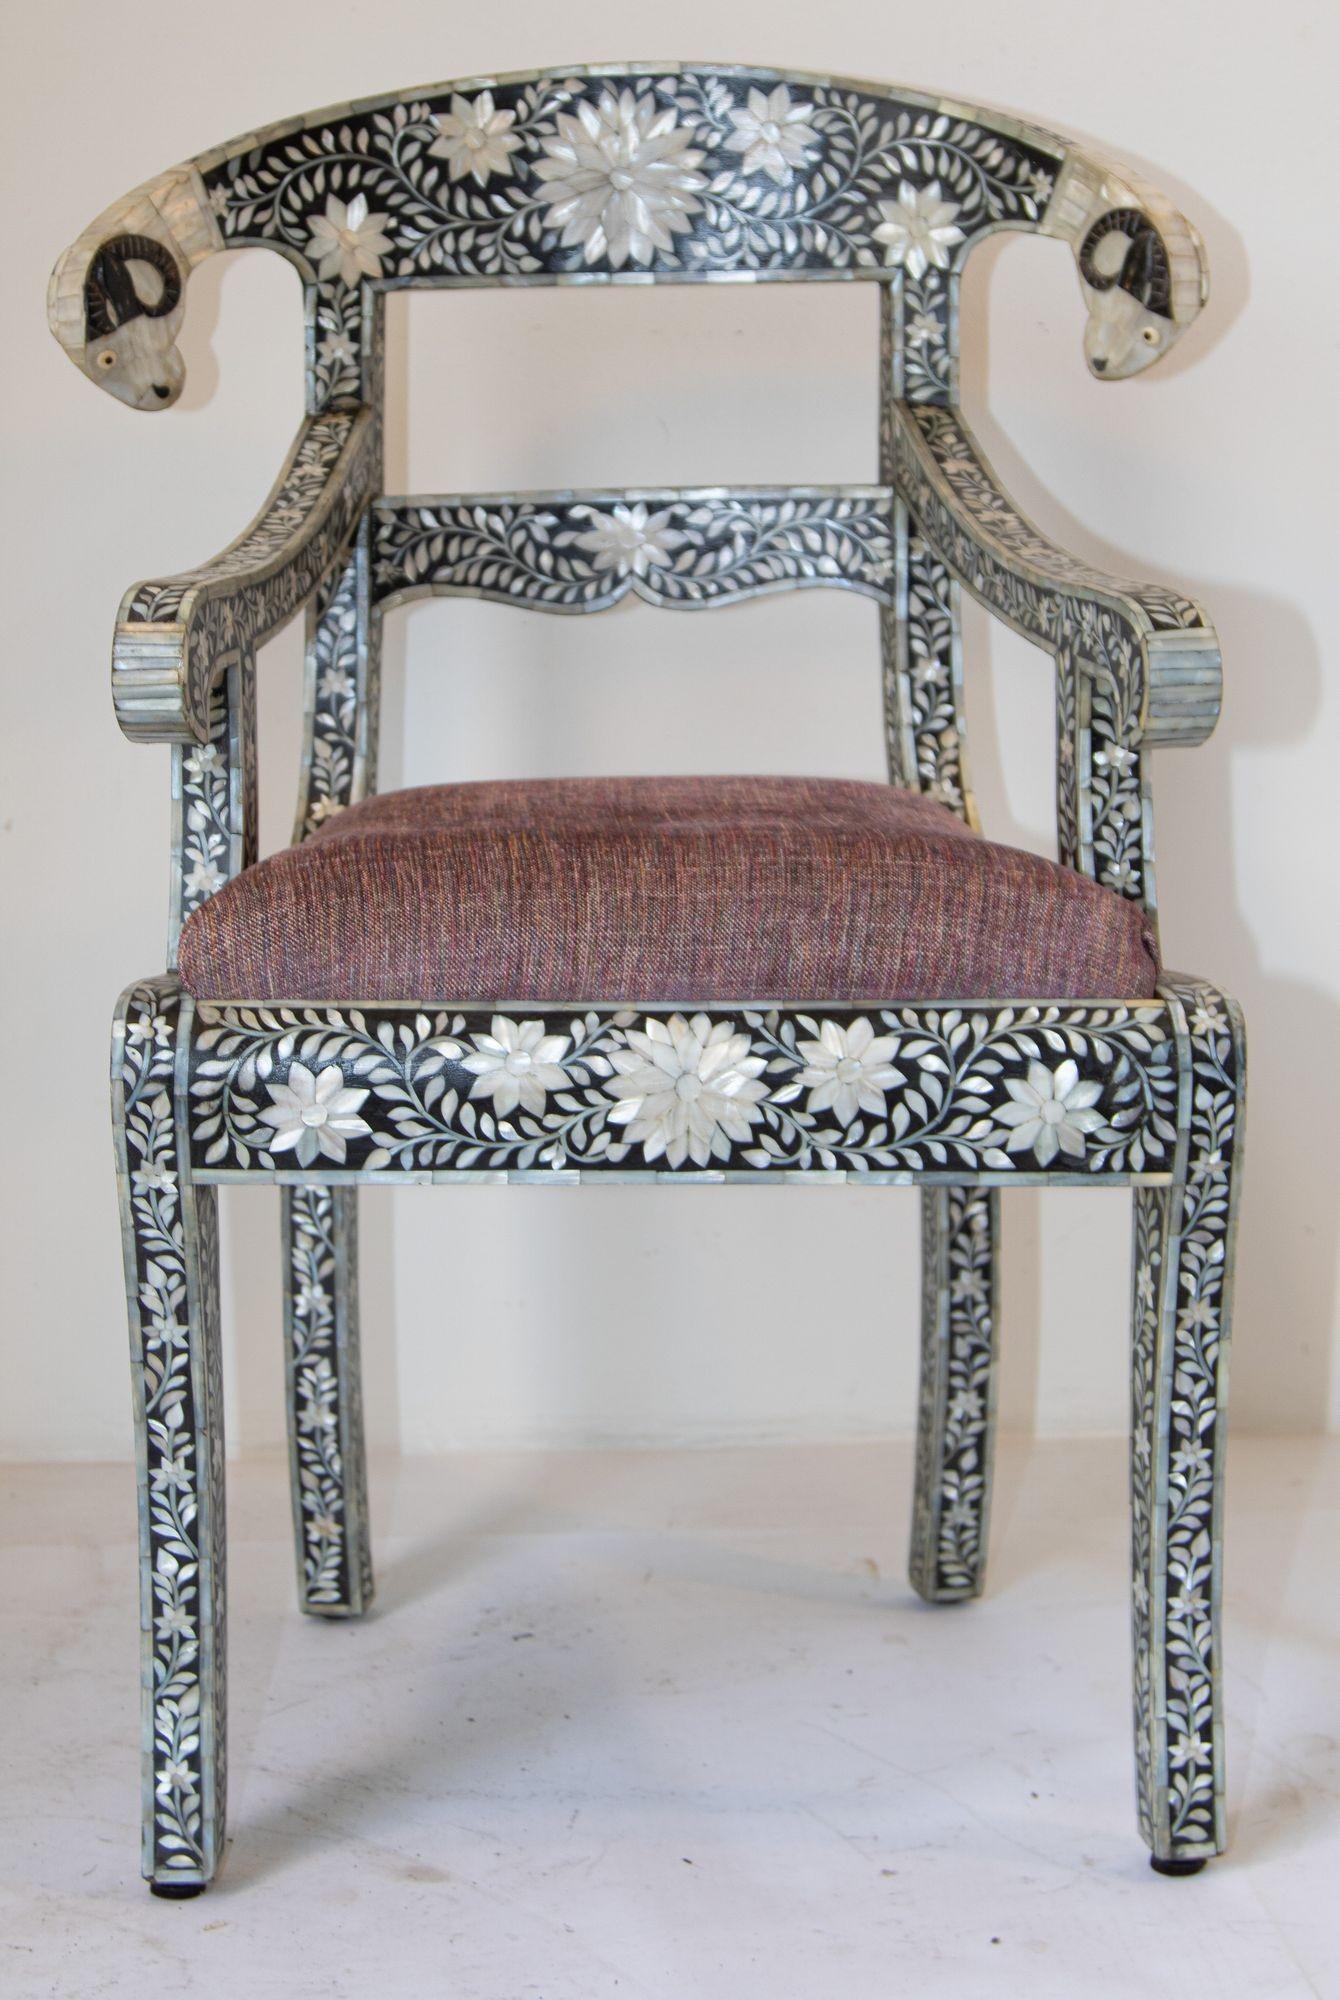 Anglo-Indian Mughal Mother of Pearl Inlaid Klismos Armchair with Ram Head. 1 of 2 available.
Anglo-Indian Mughal black and white mother of pearl inlaid armchair with ram's head.
Mother-of-pearl klismos style armchair with ram head detail.
This